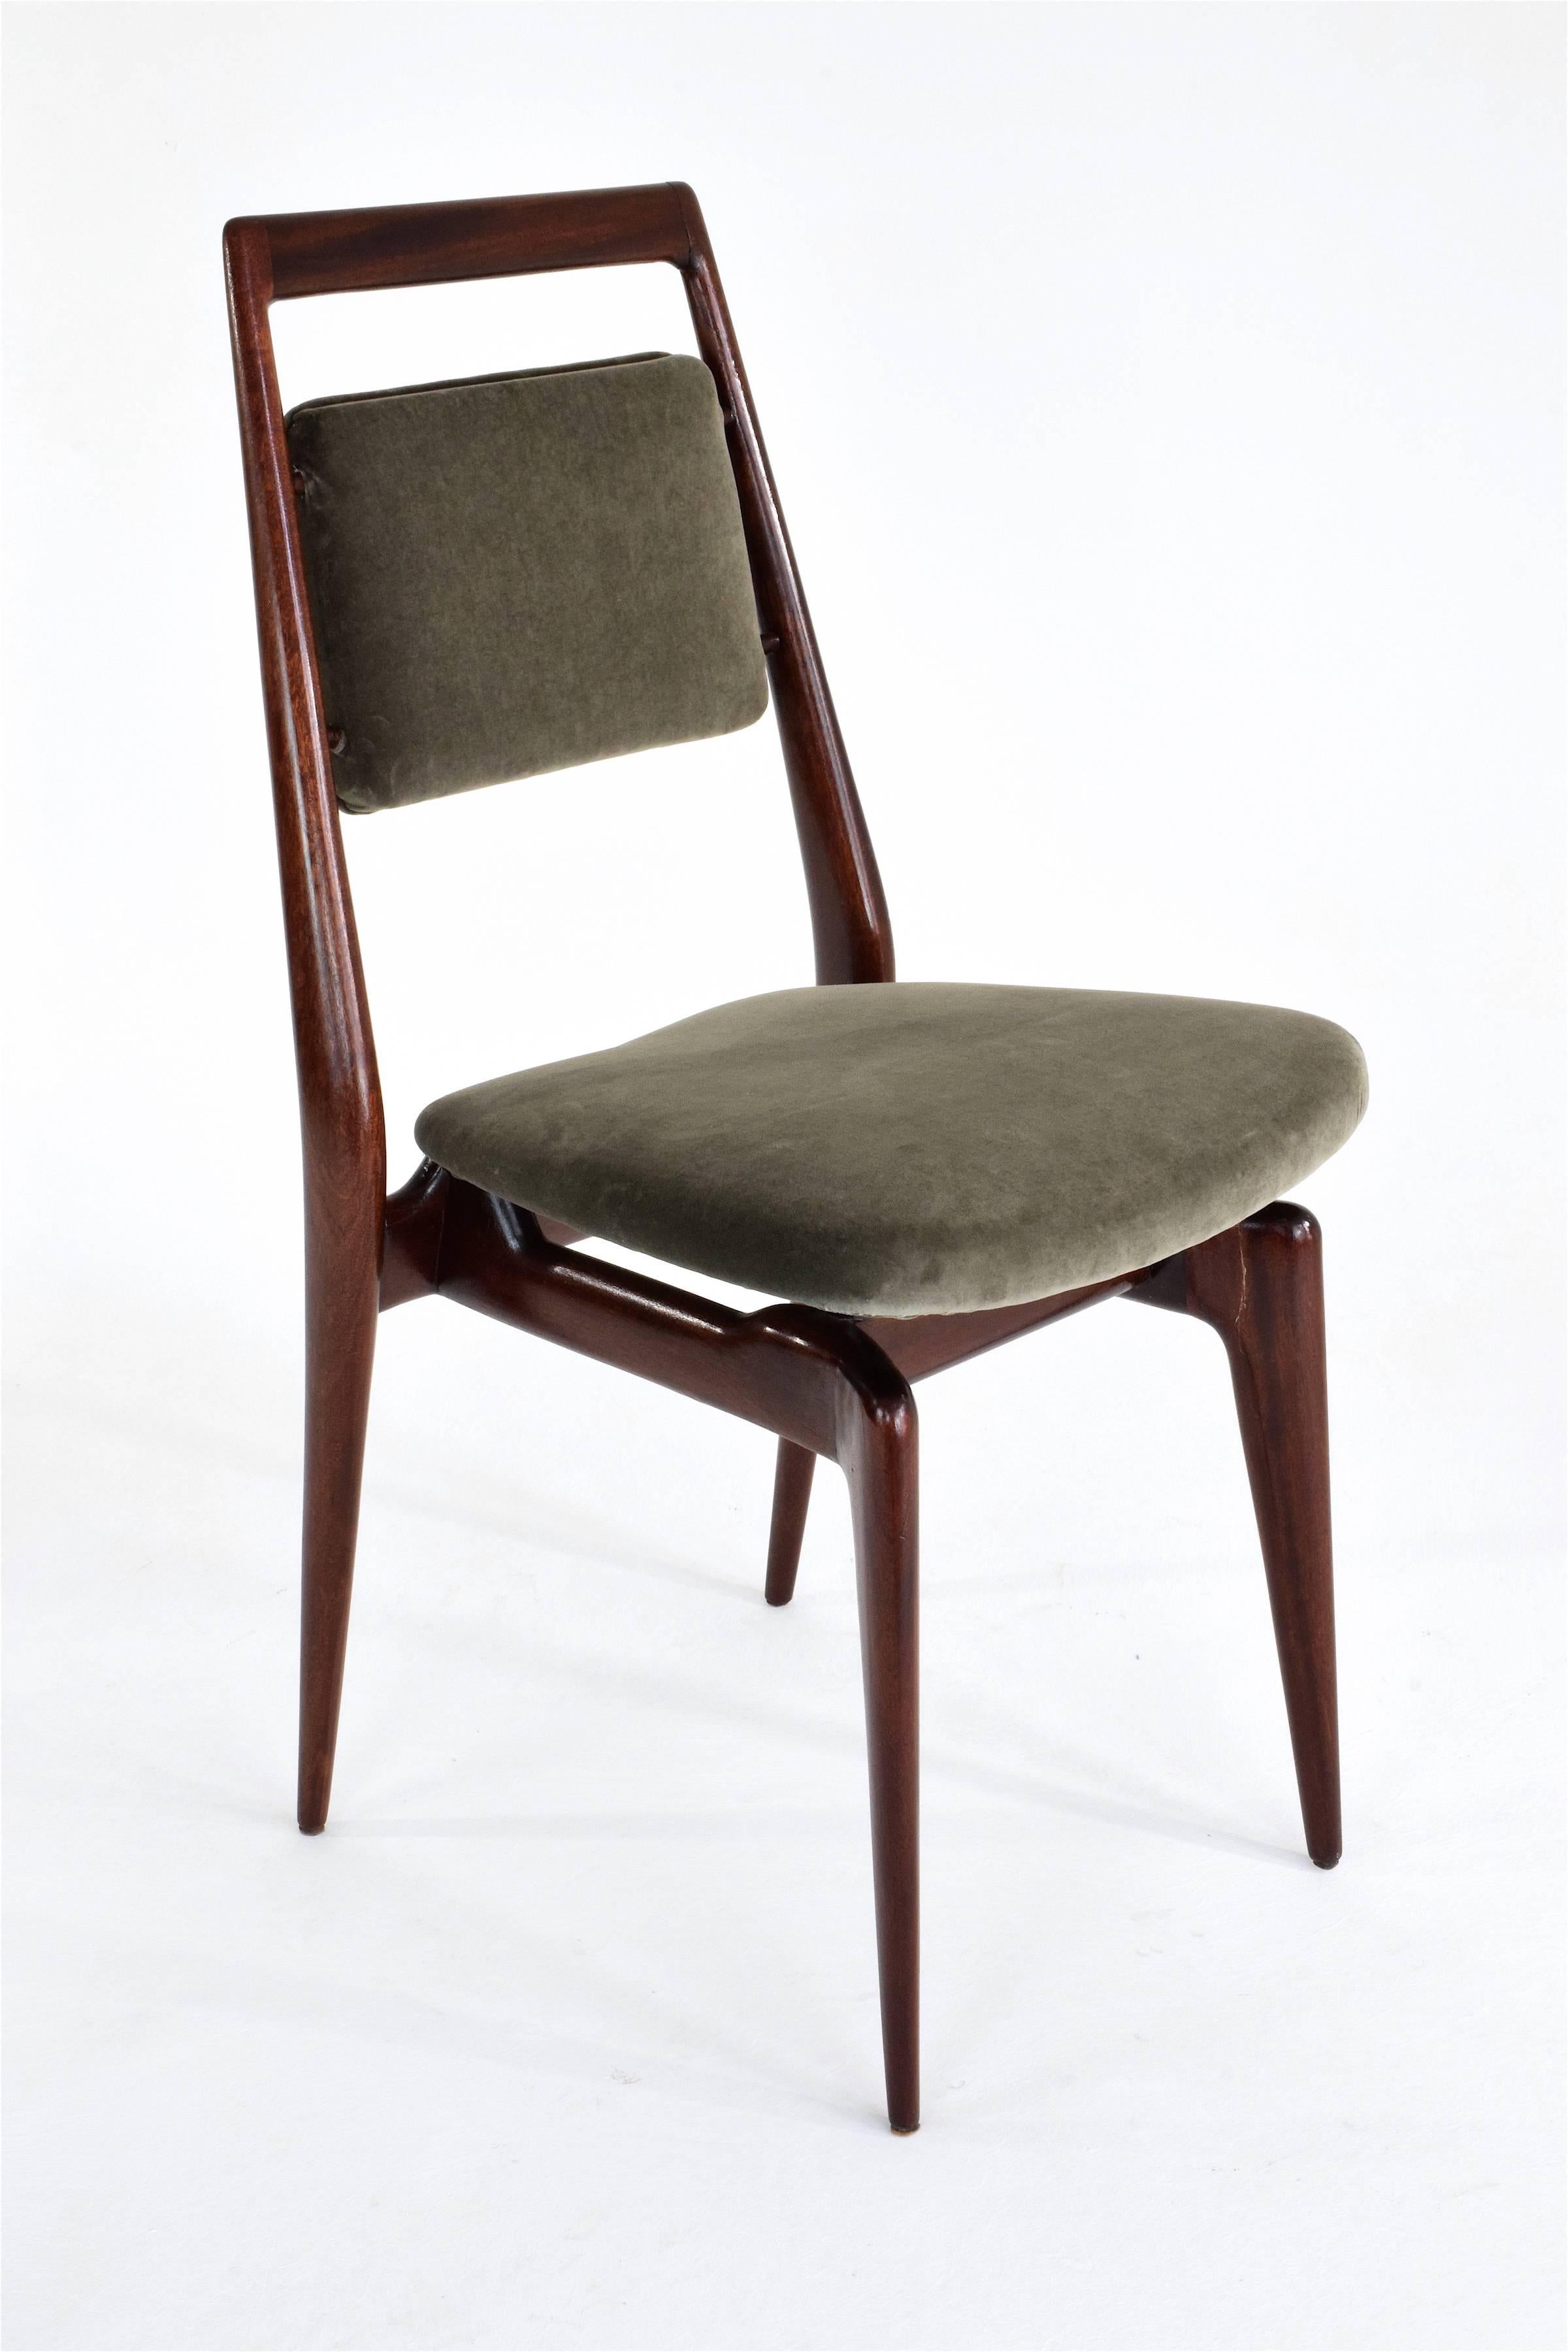  20th century vintage set of six Italian Mid-Century design dining chairs composed of a mahogany lacquered structure with splayed and tapered legs in fully restored condition. 

Re-upholstered in high quality Lelièvre Paris velvet in dark grey